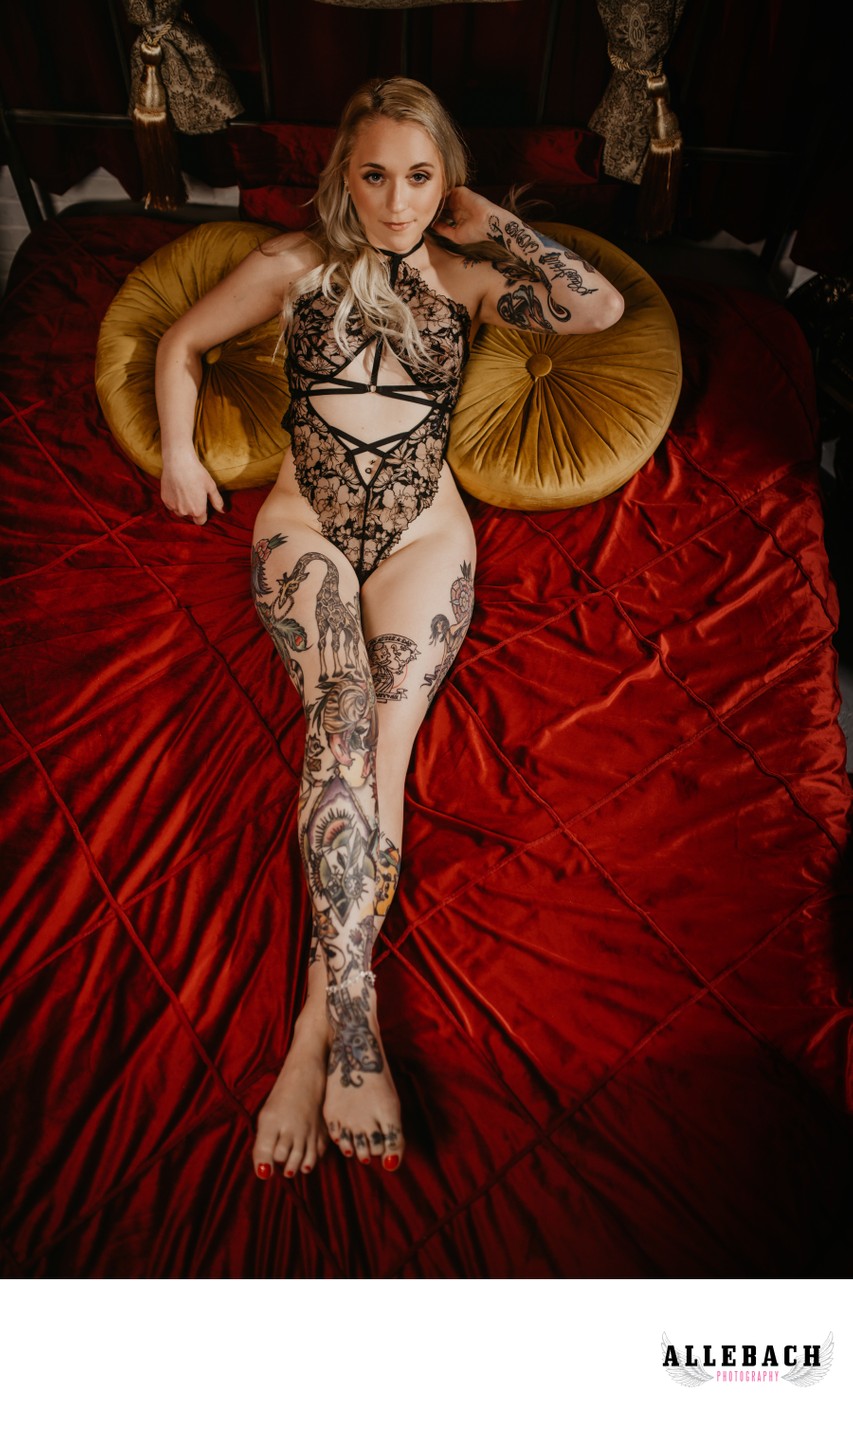 A Philly PA Boudoir Shoot